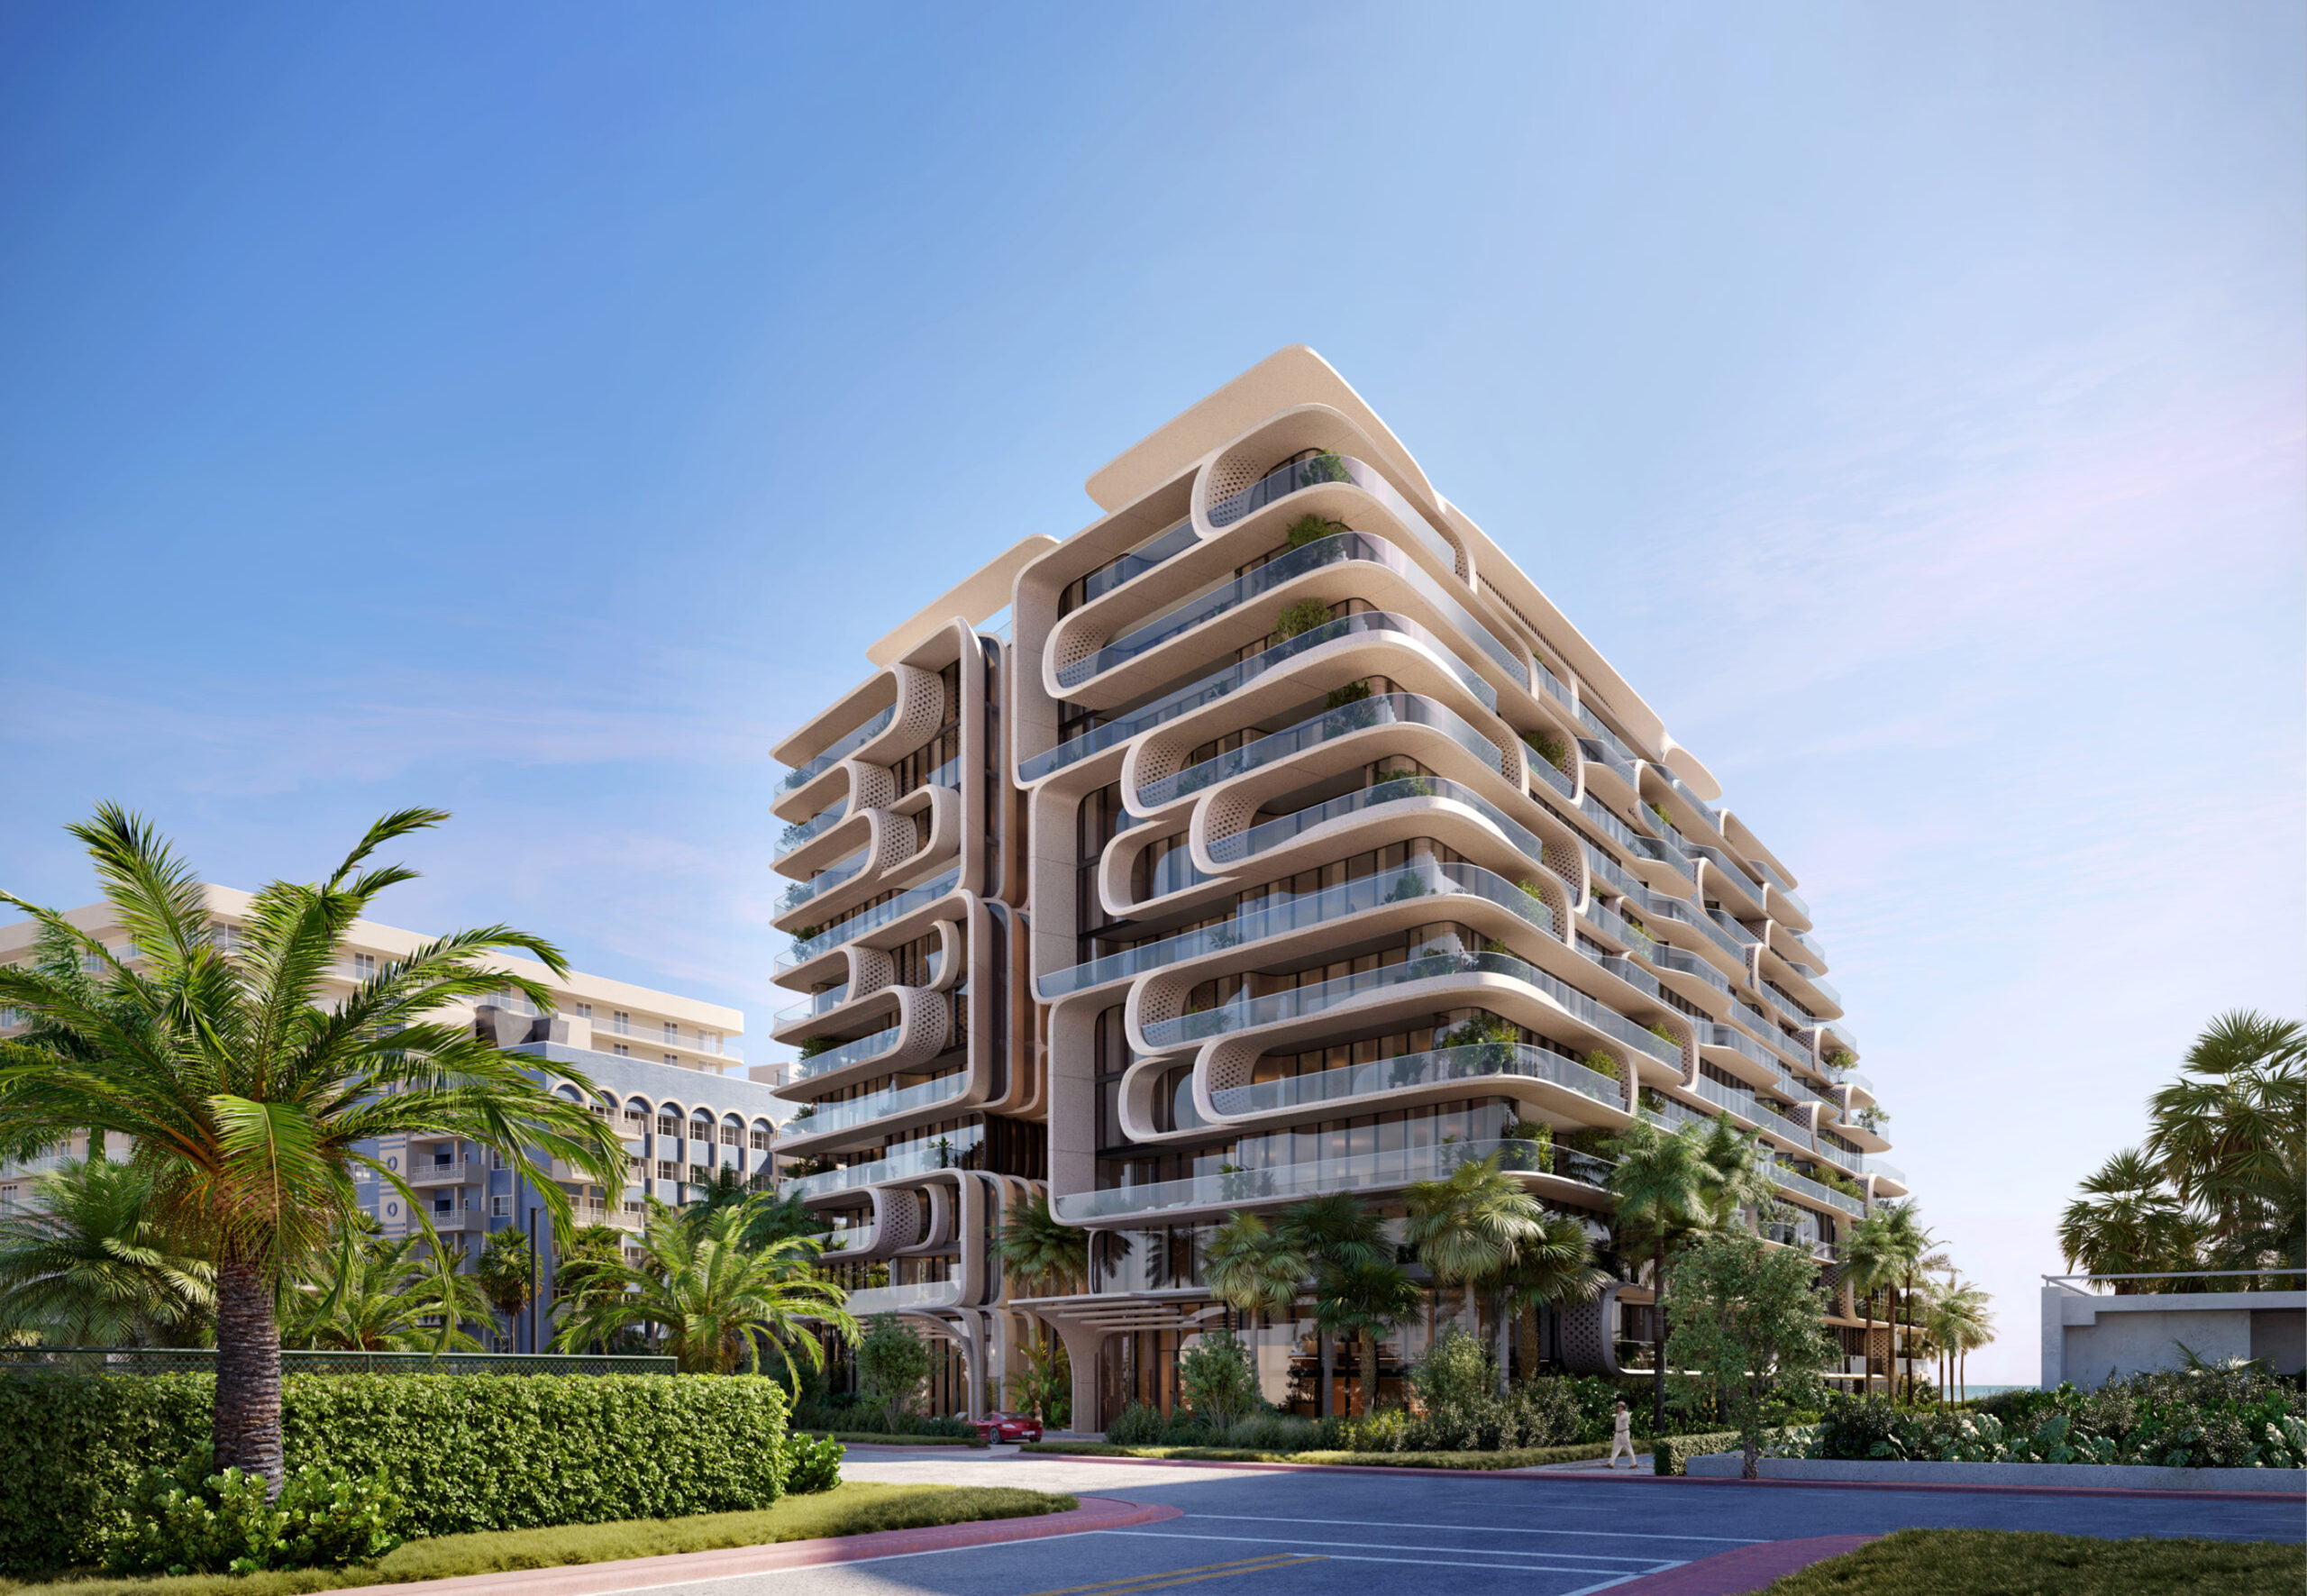 Damac Unveils Condominium Project Designed by Hadid Architects at the Former Surfside Collapse Site